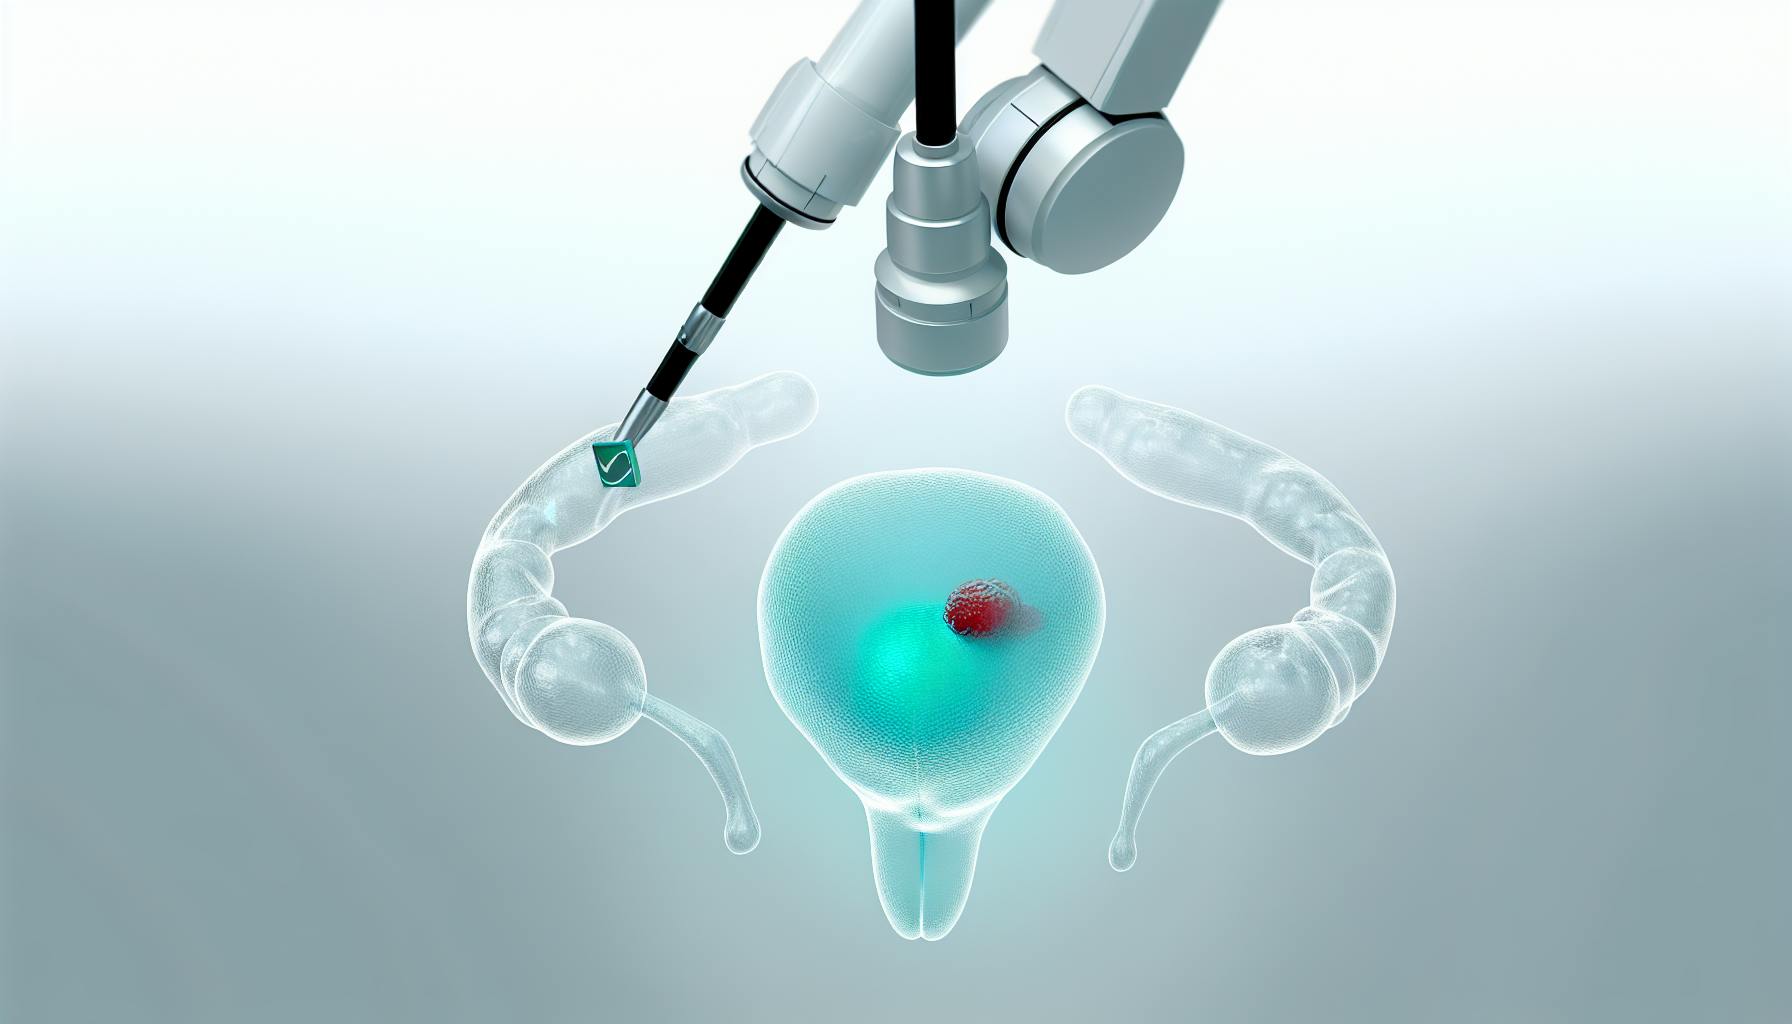 Robotic Resection for Prostate Cancer